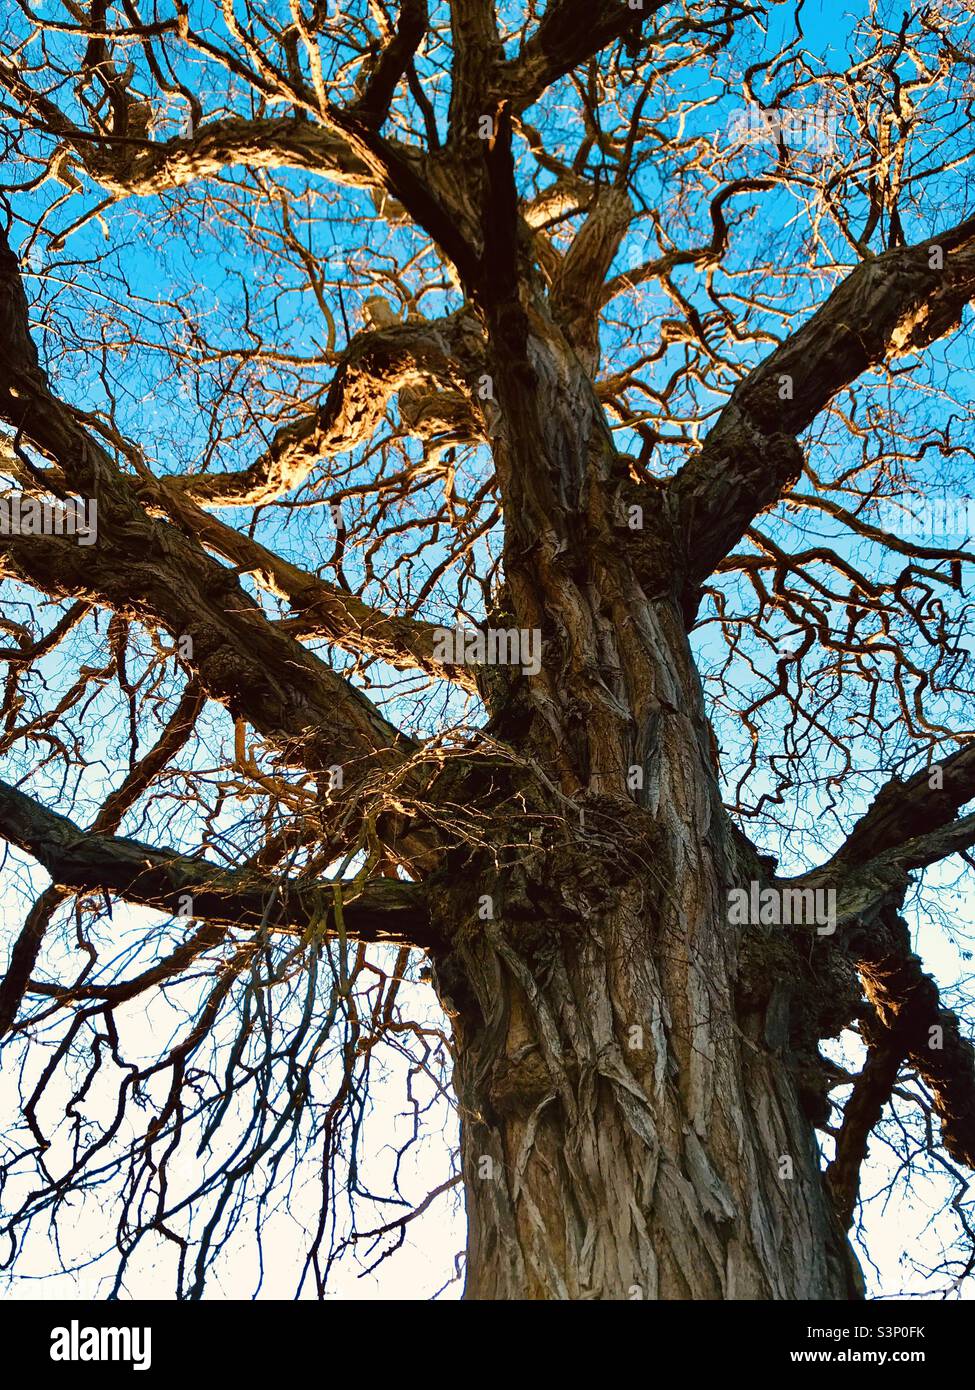 Upward shot of a Craggy old tree against a blue sky in Port Townsend Washington Stock Photo